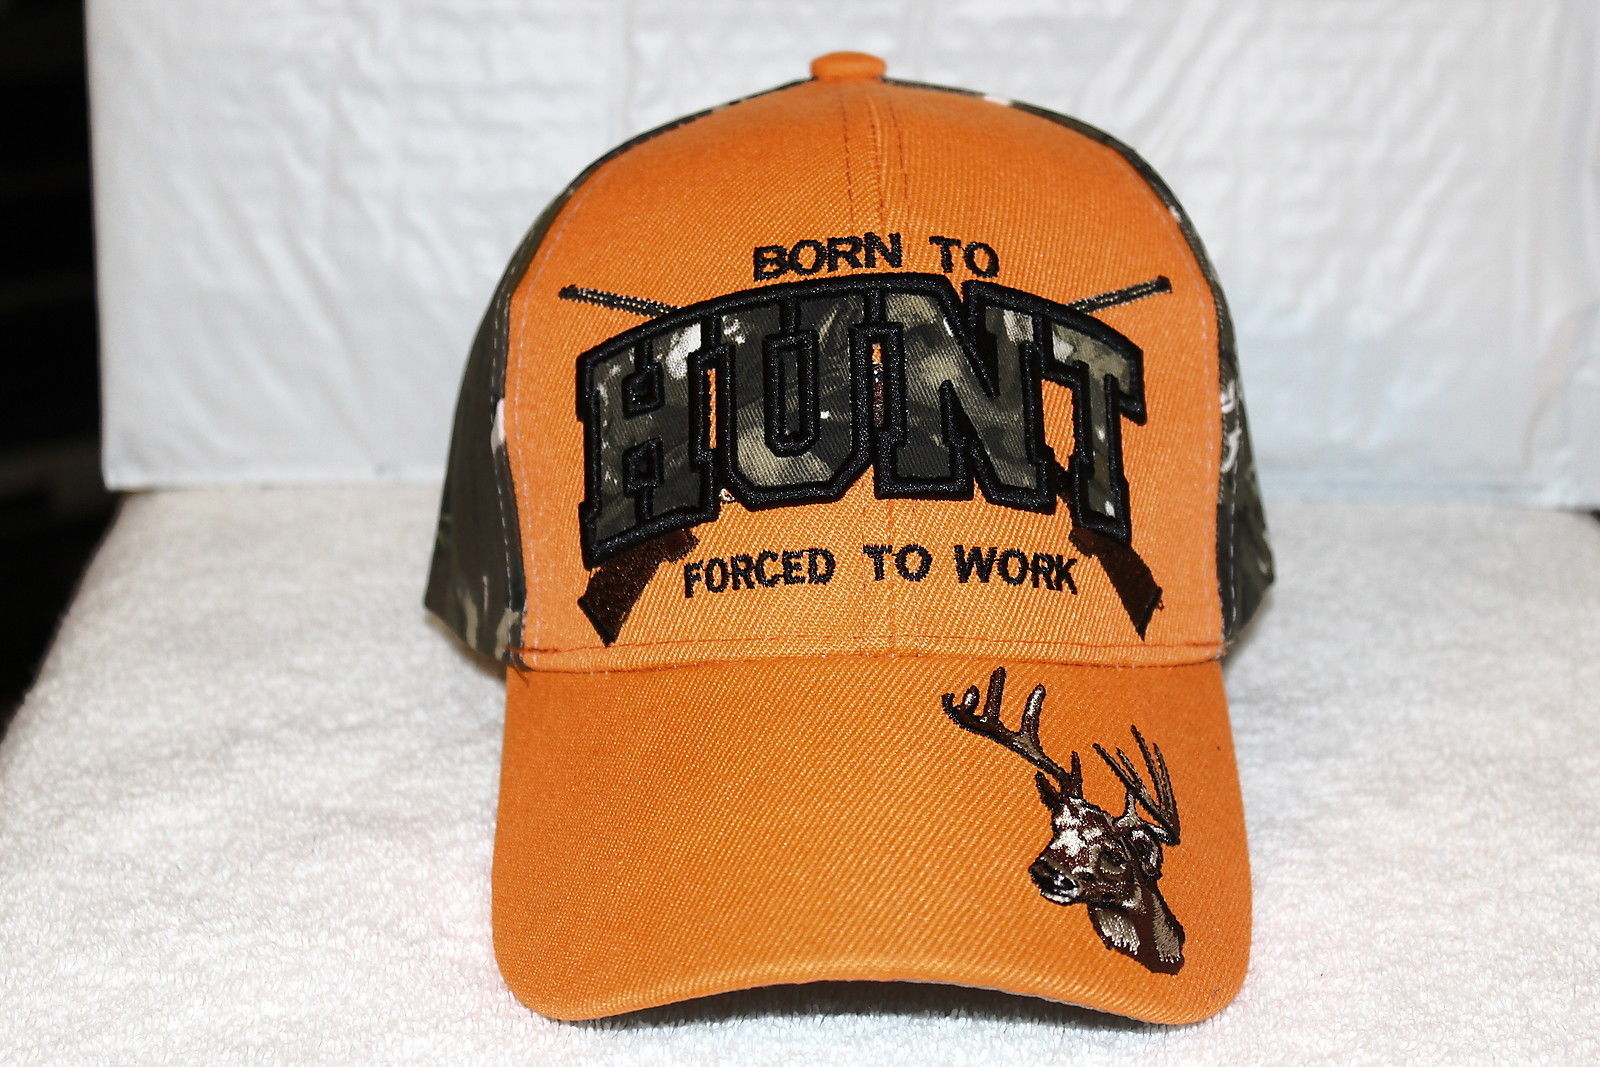 Primary image for DEER BORN TO HUNT FORCED TO WORK RIFLE BASEBALL CAP ( CAMOUFLAGE & ORANGE )